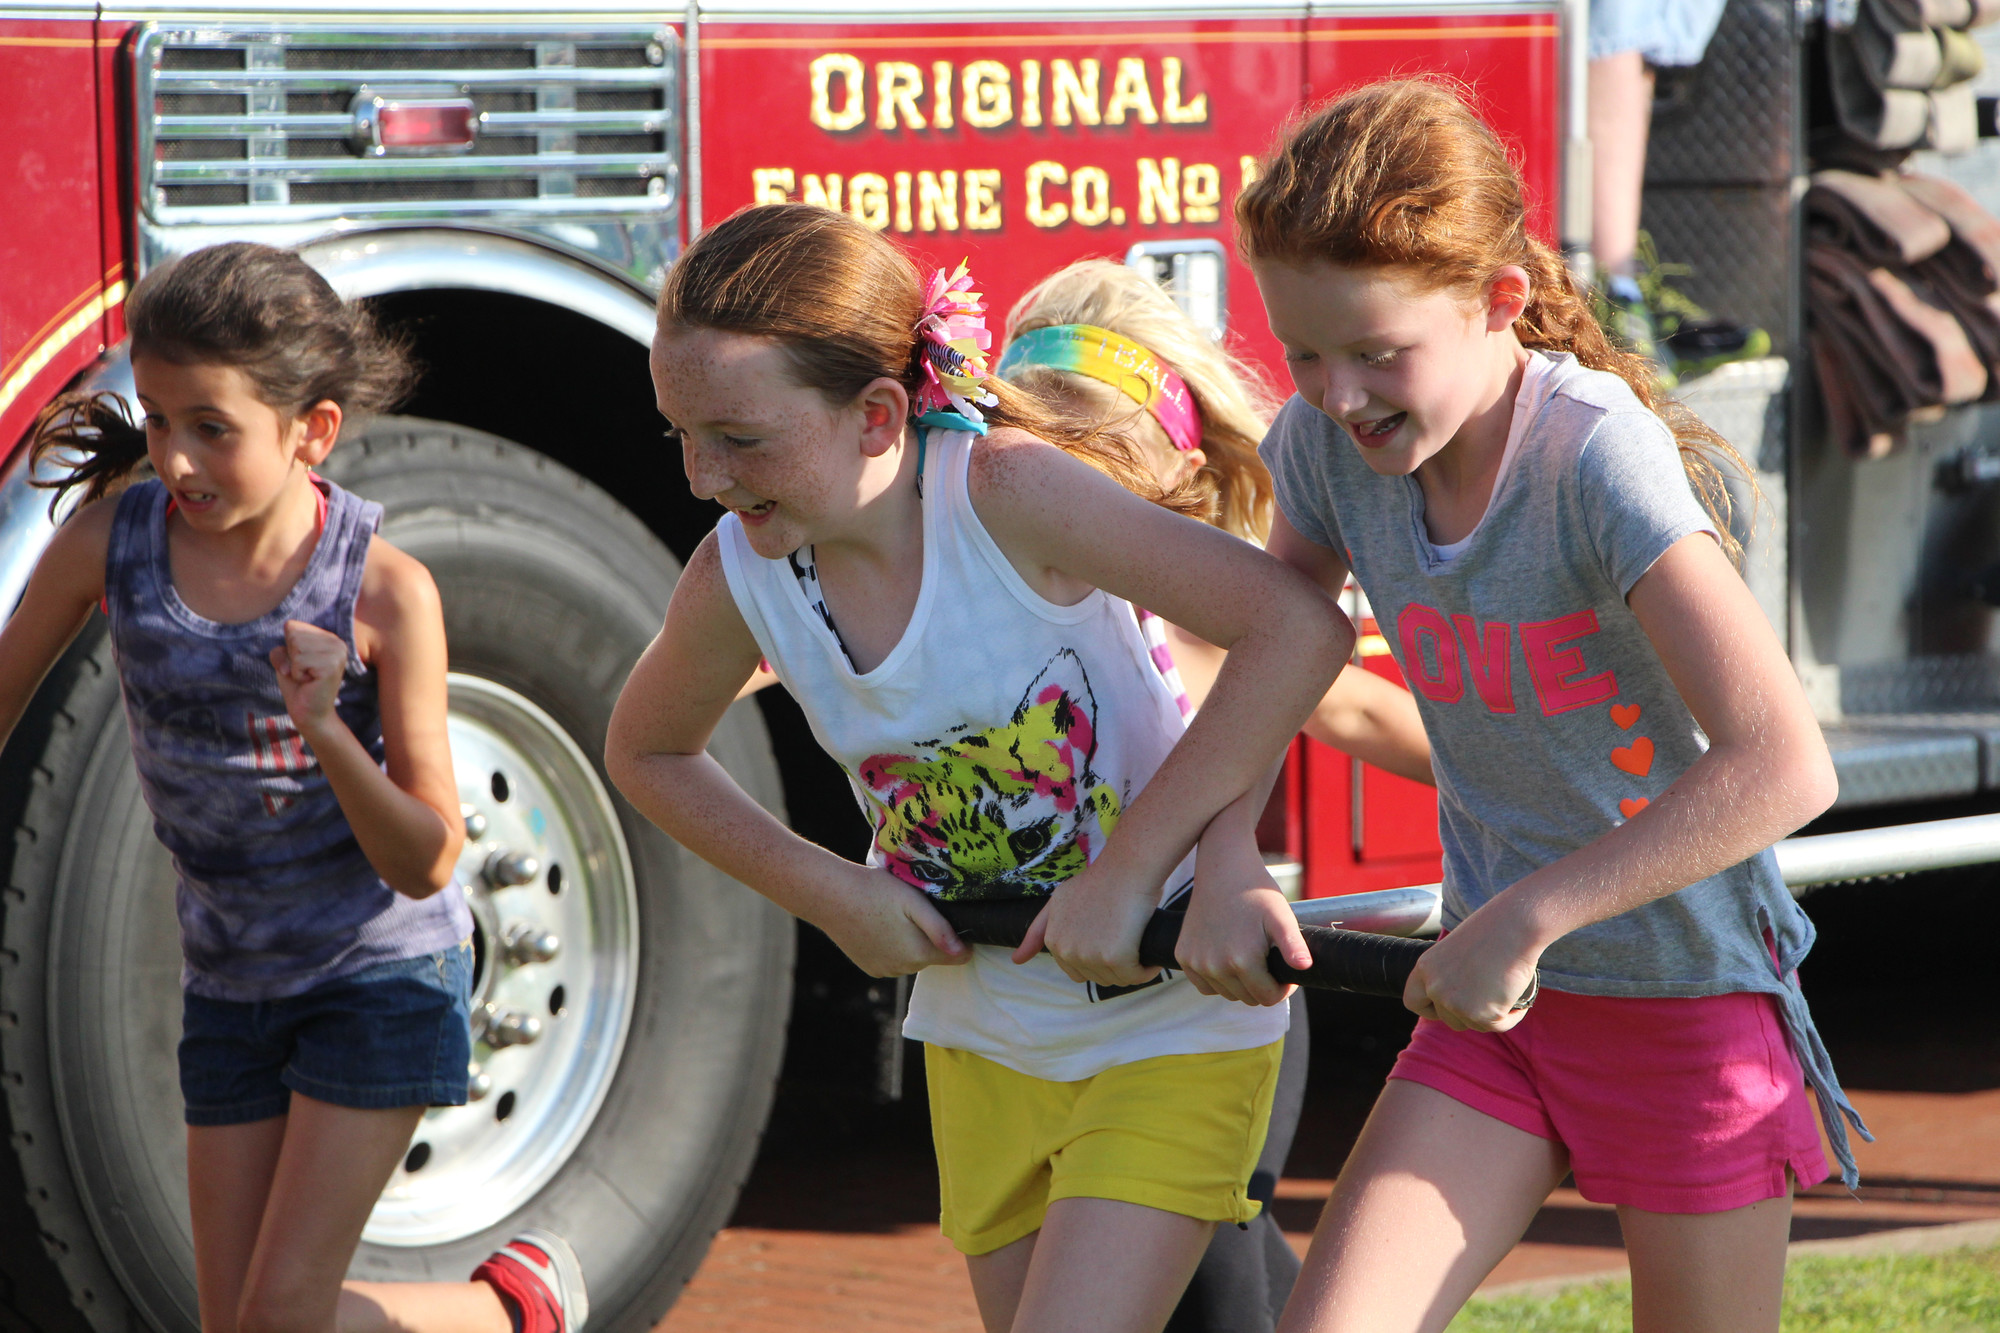 Sophia Cerreto, Colleen Reichel, Paige Perrone, all 9 years old, race to the “fire”.